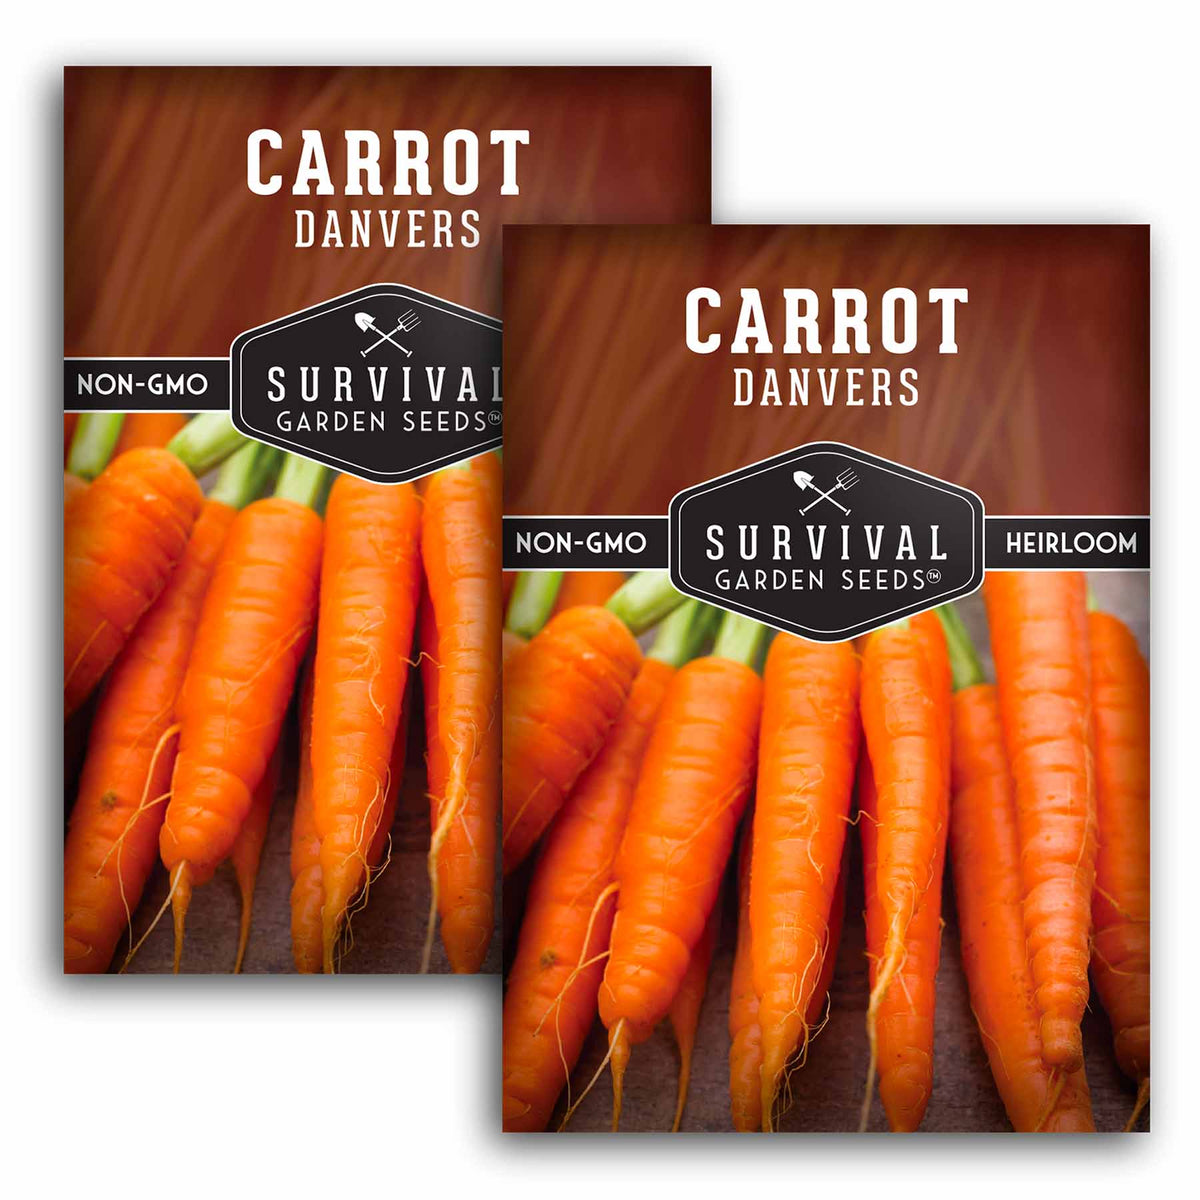 2 Packets of Danvers Carrot seeds